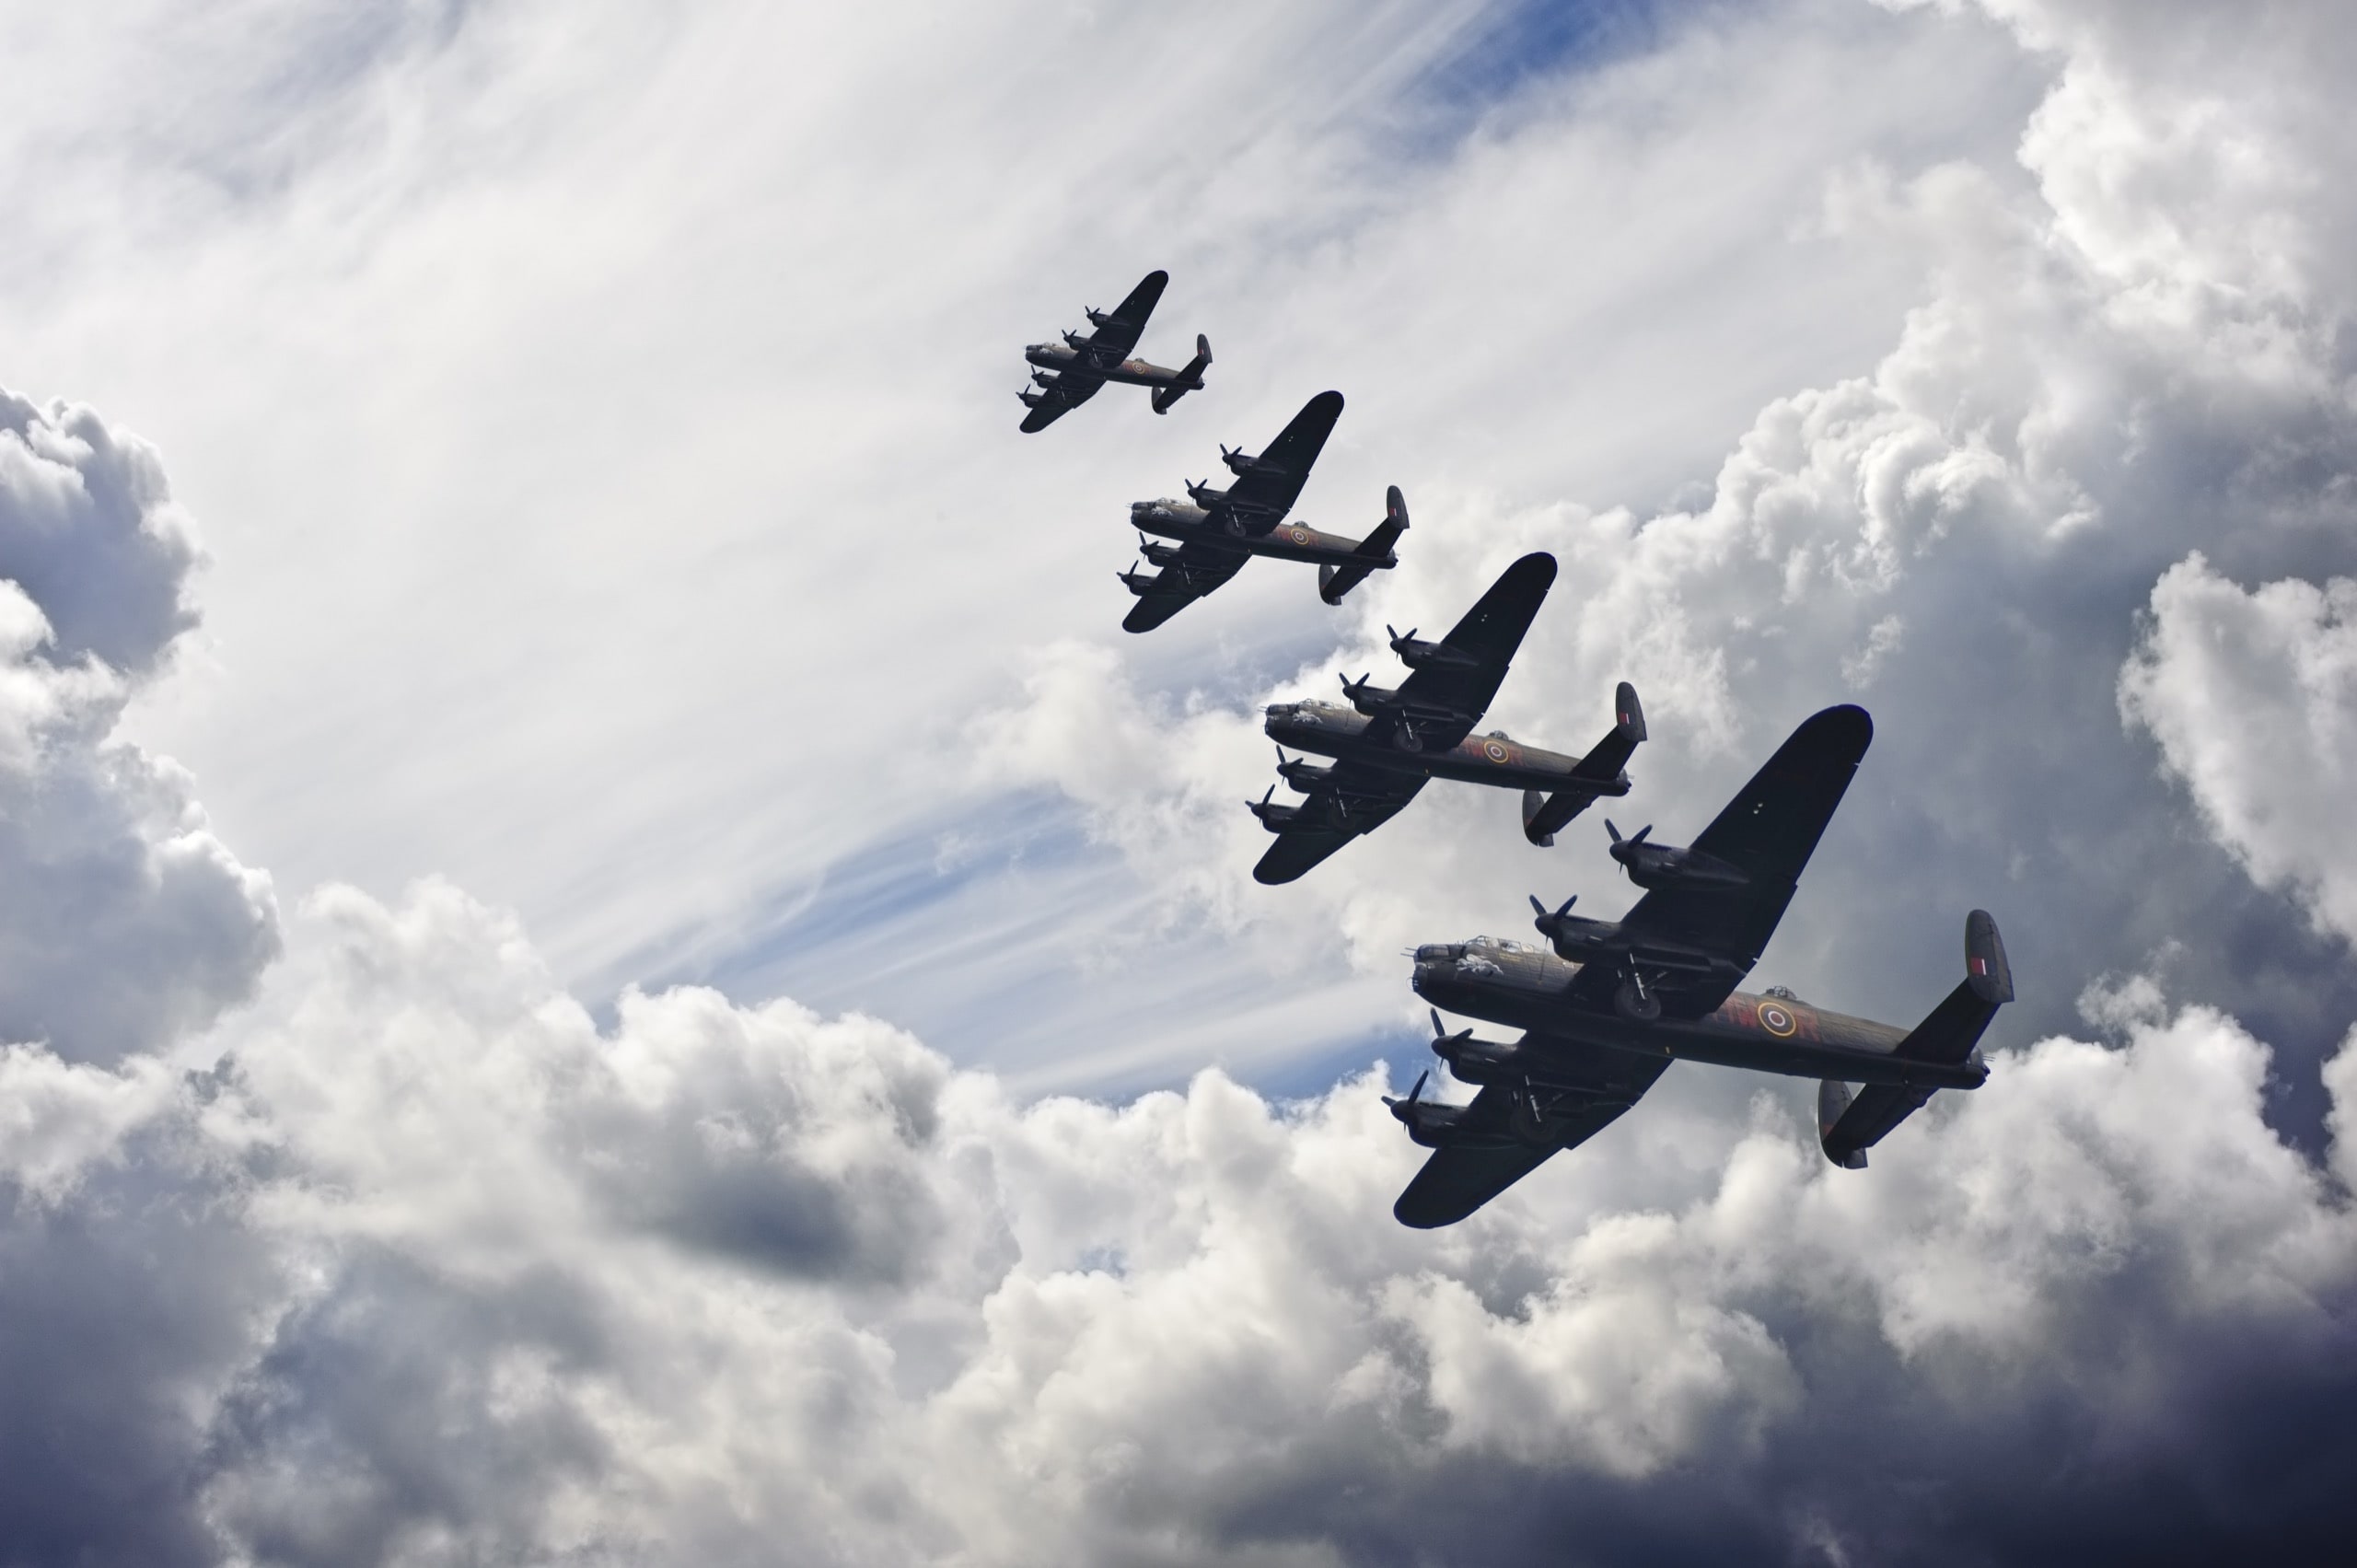 Flight formation of Battle of Britain World War Two consisting of Lancaster bombers banking right